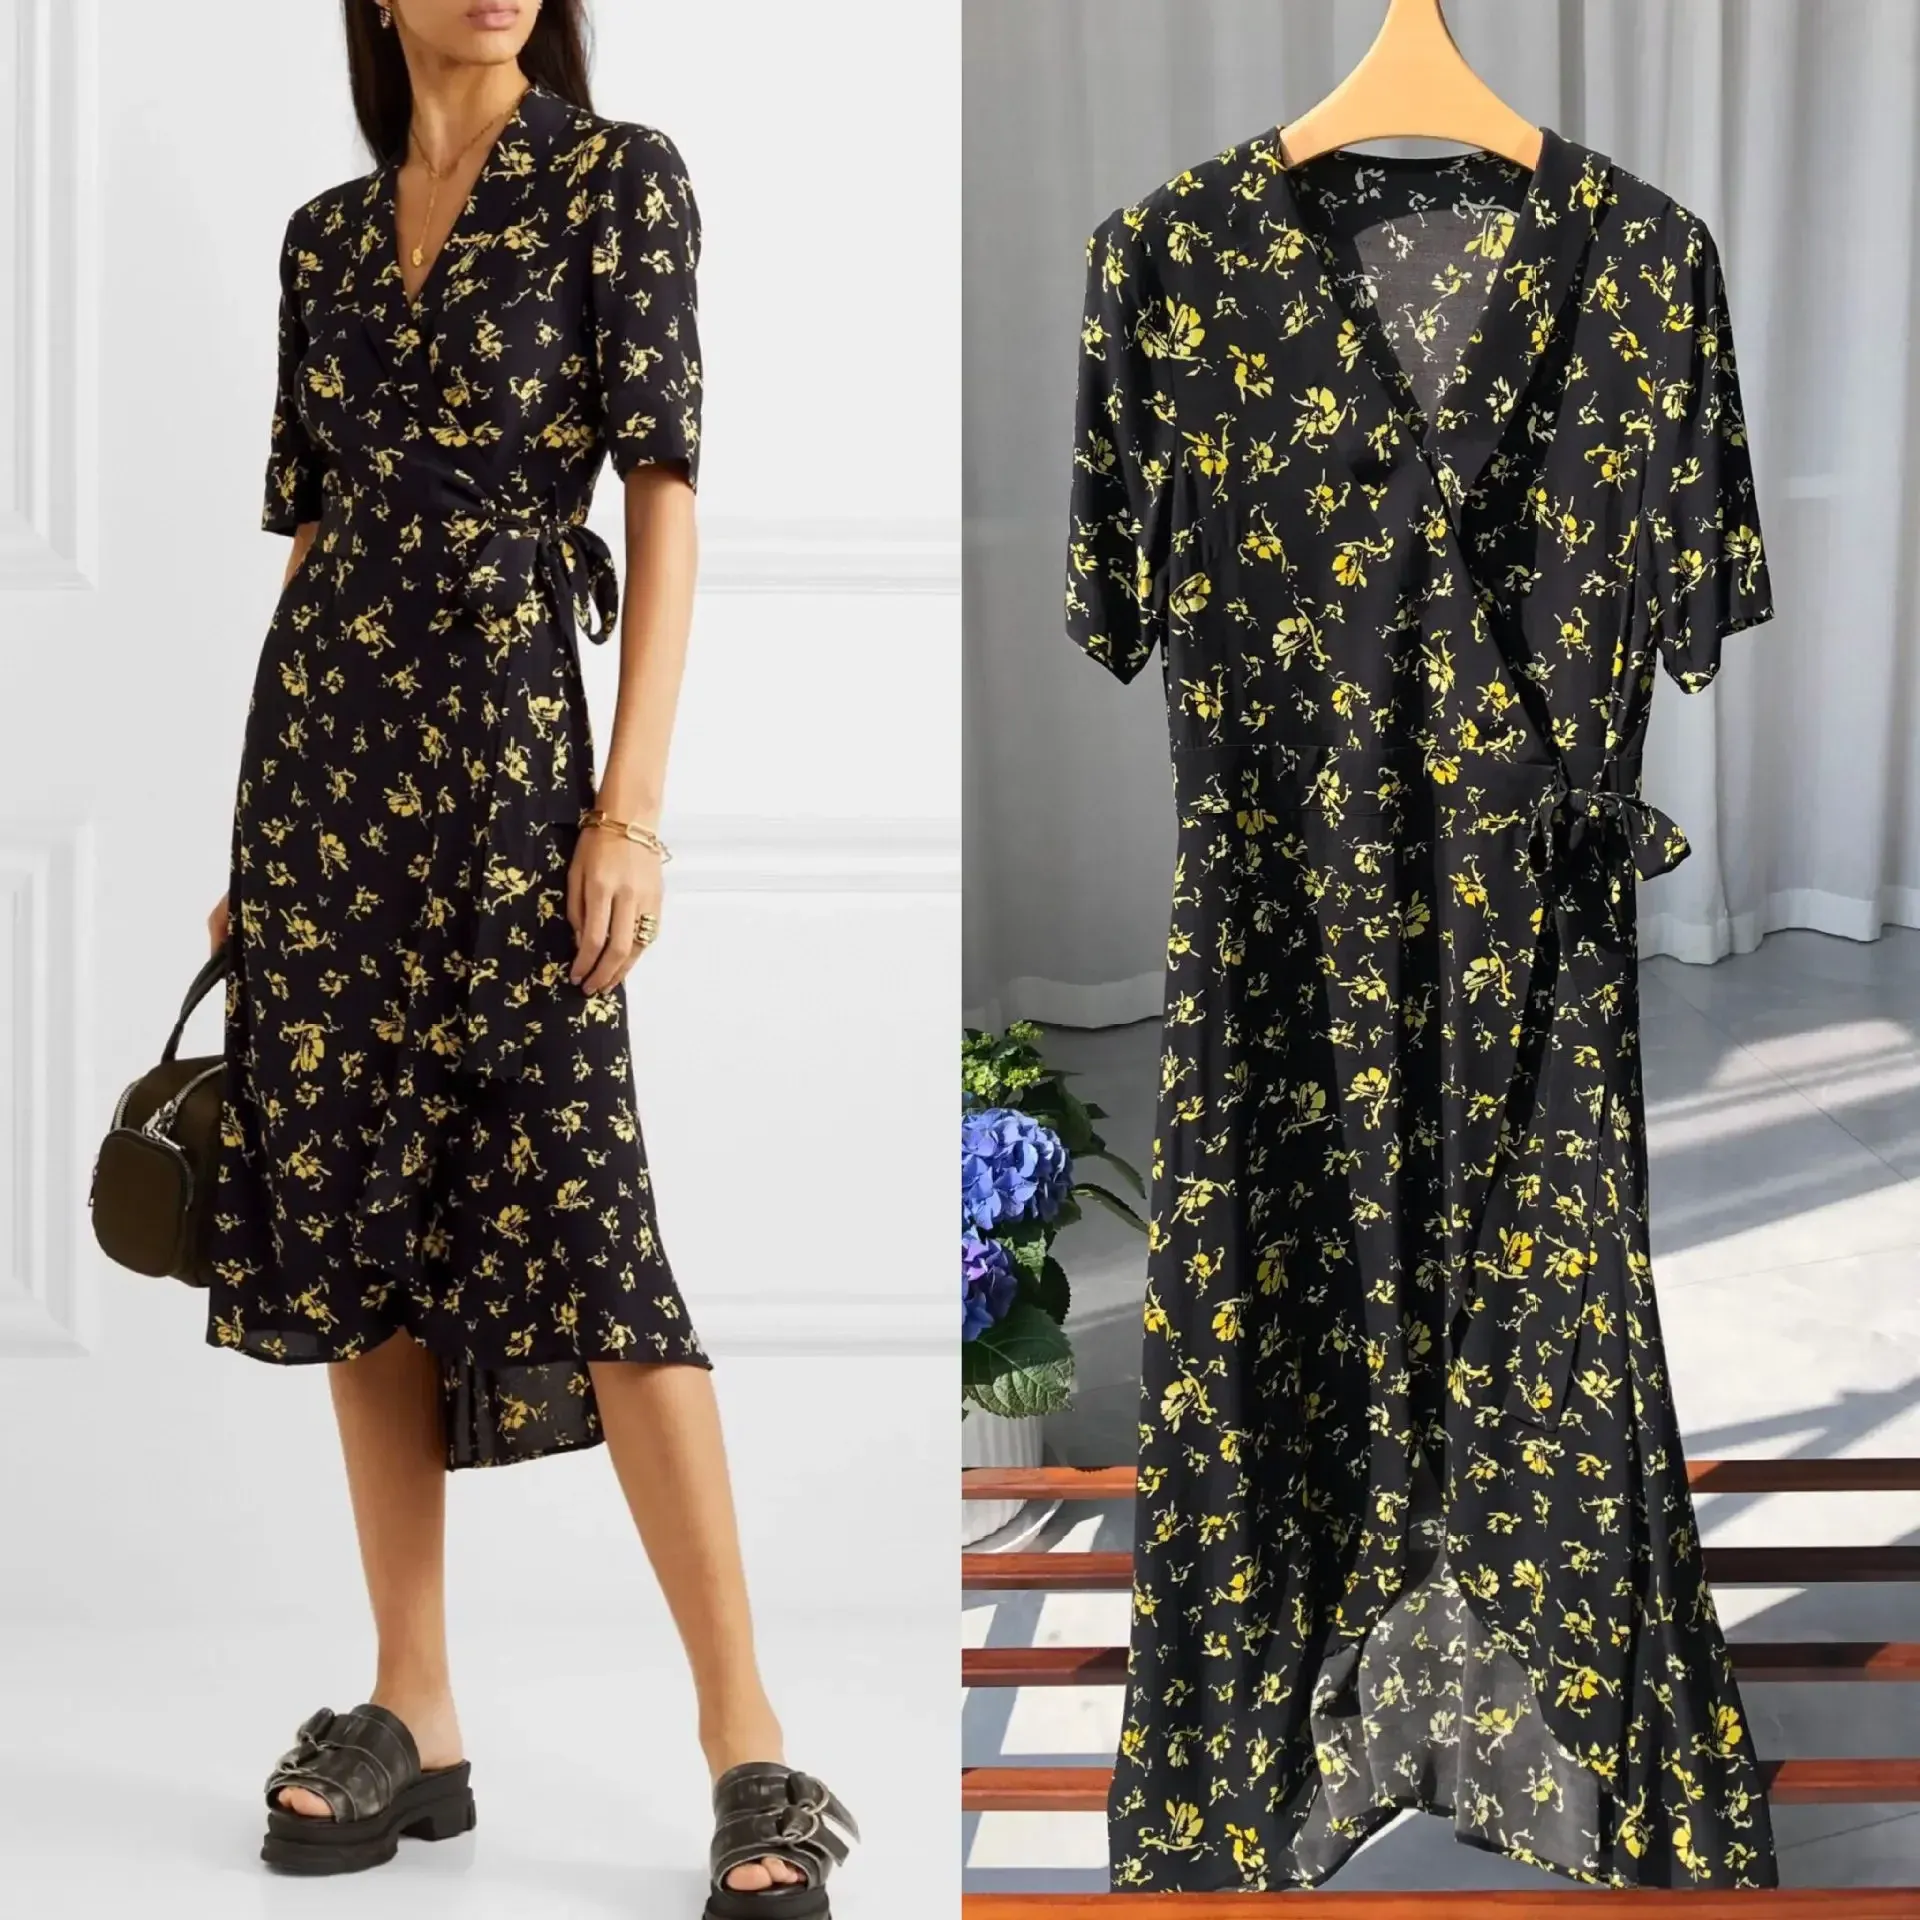 French style floral black wrap dress with black background and yellow flowers for women's summer tea break dress dress